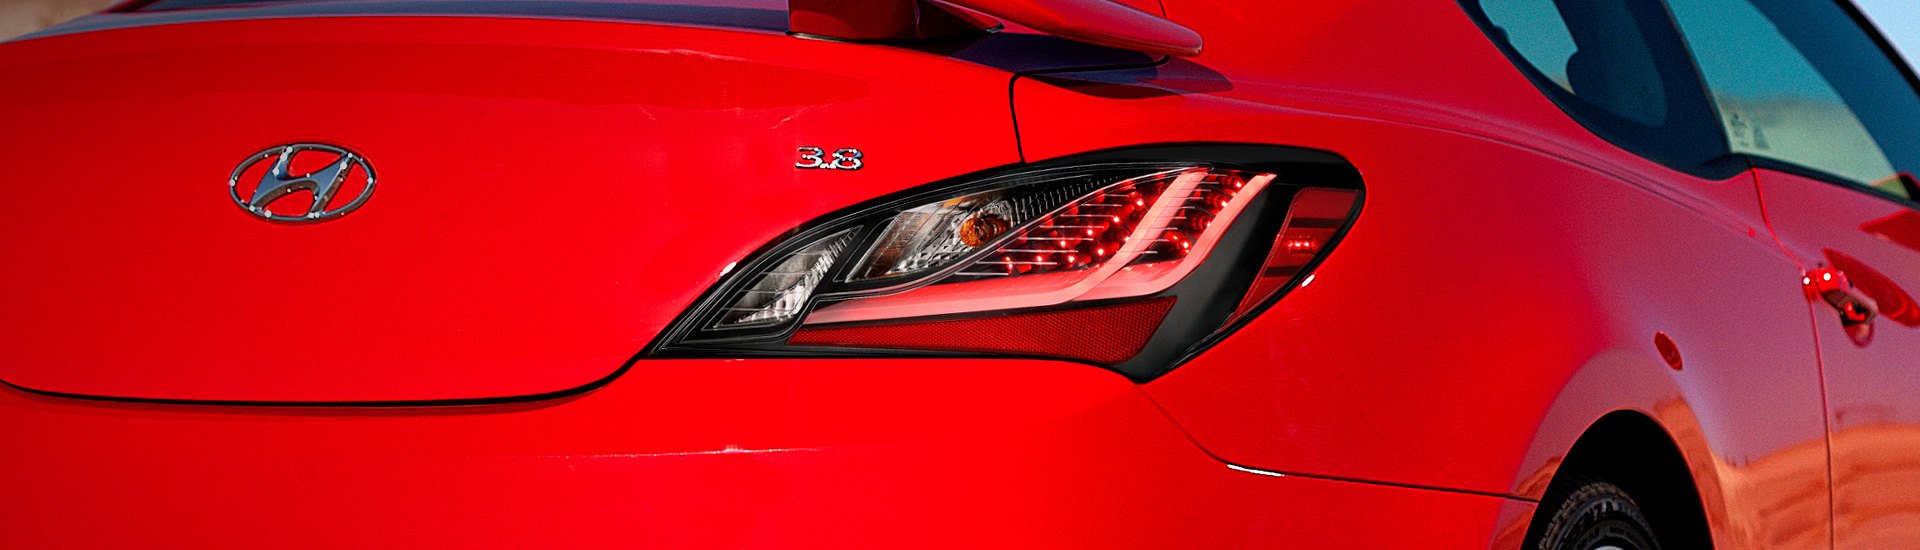 Say Hello To All-New Anzo LED Tail Lights For ‘10-’13 Hyundai Genesis Coupe